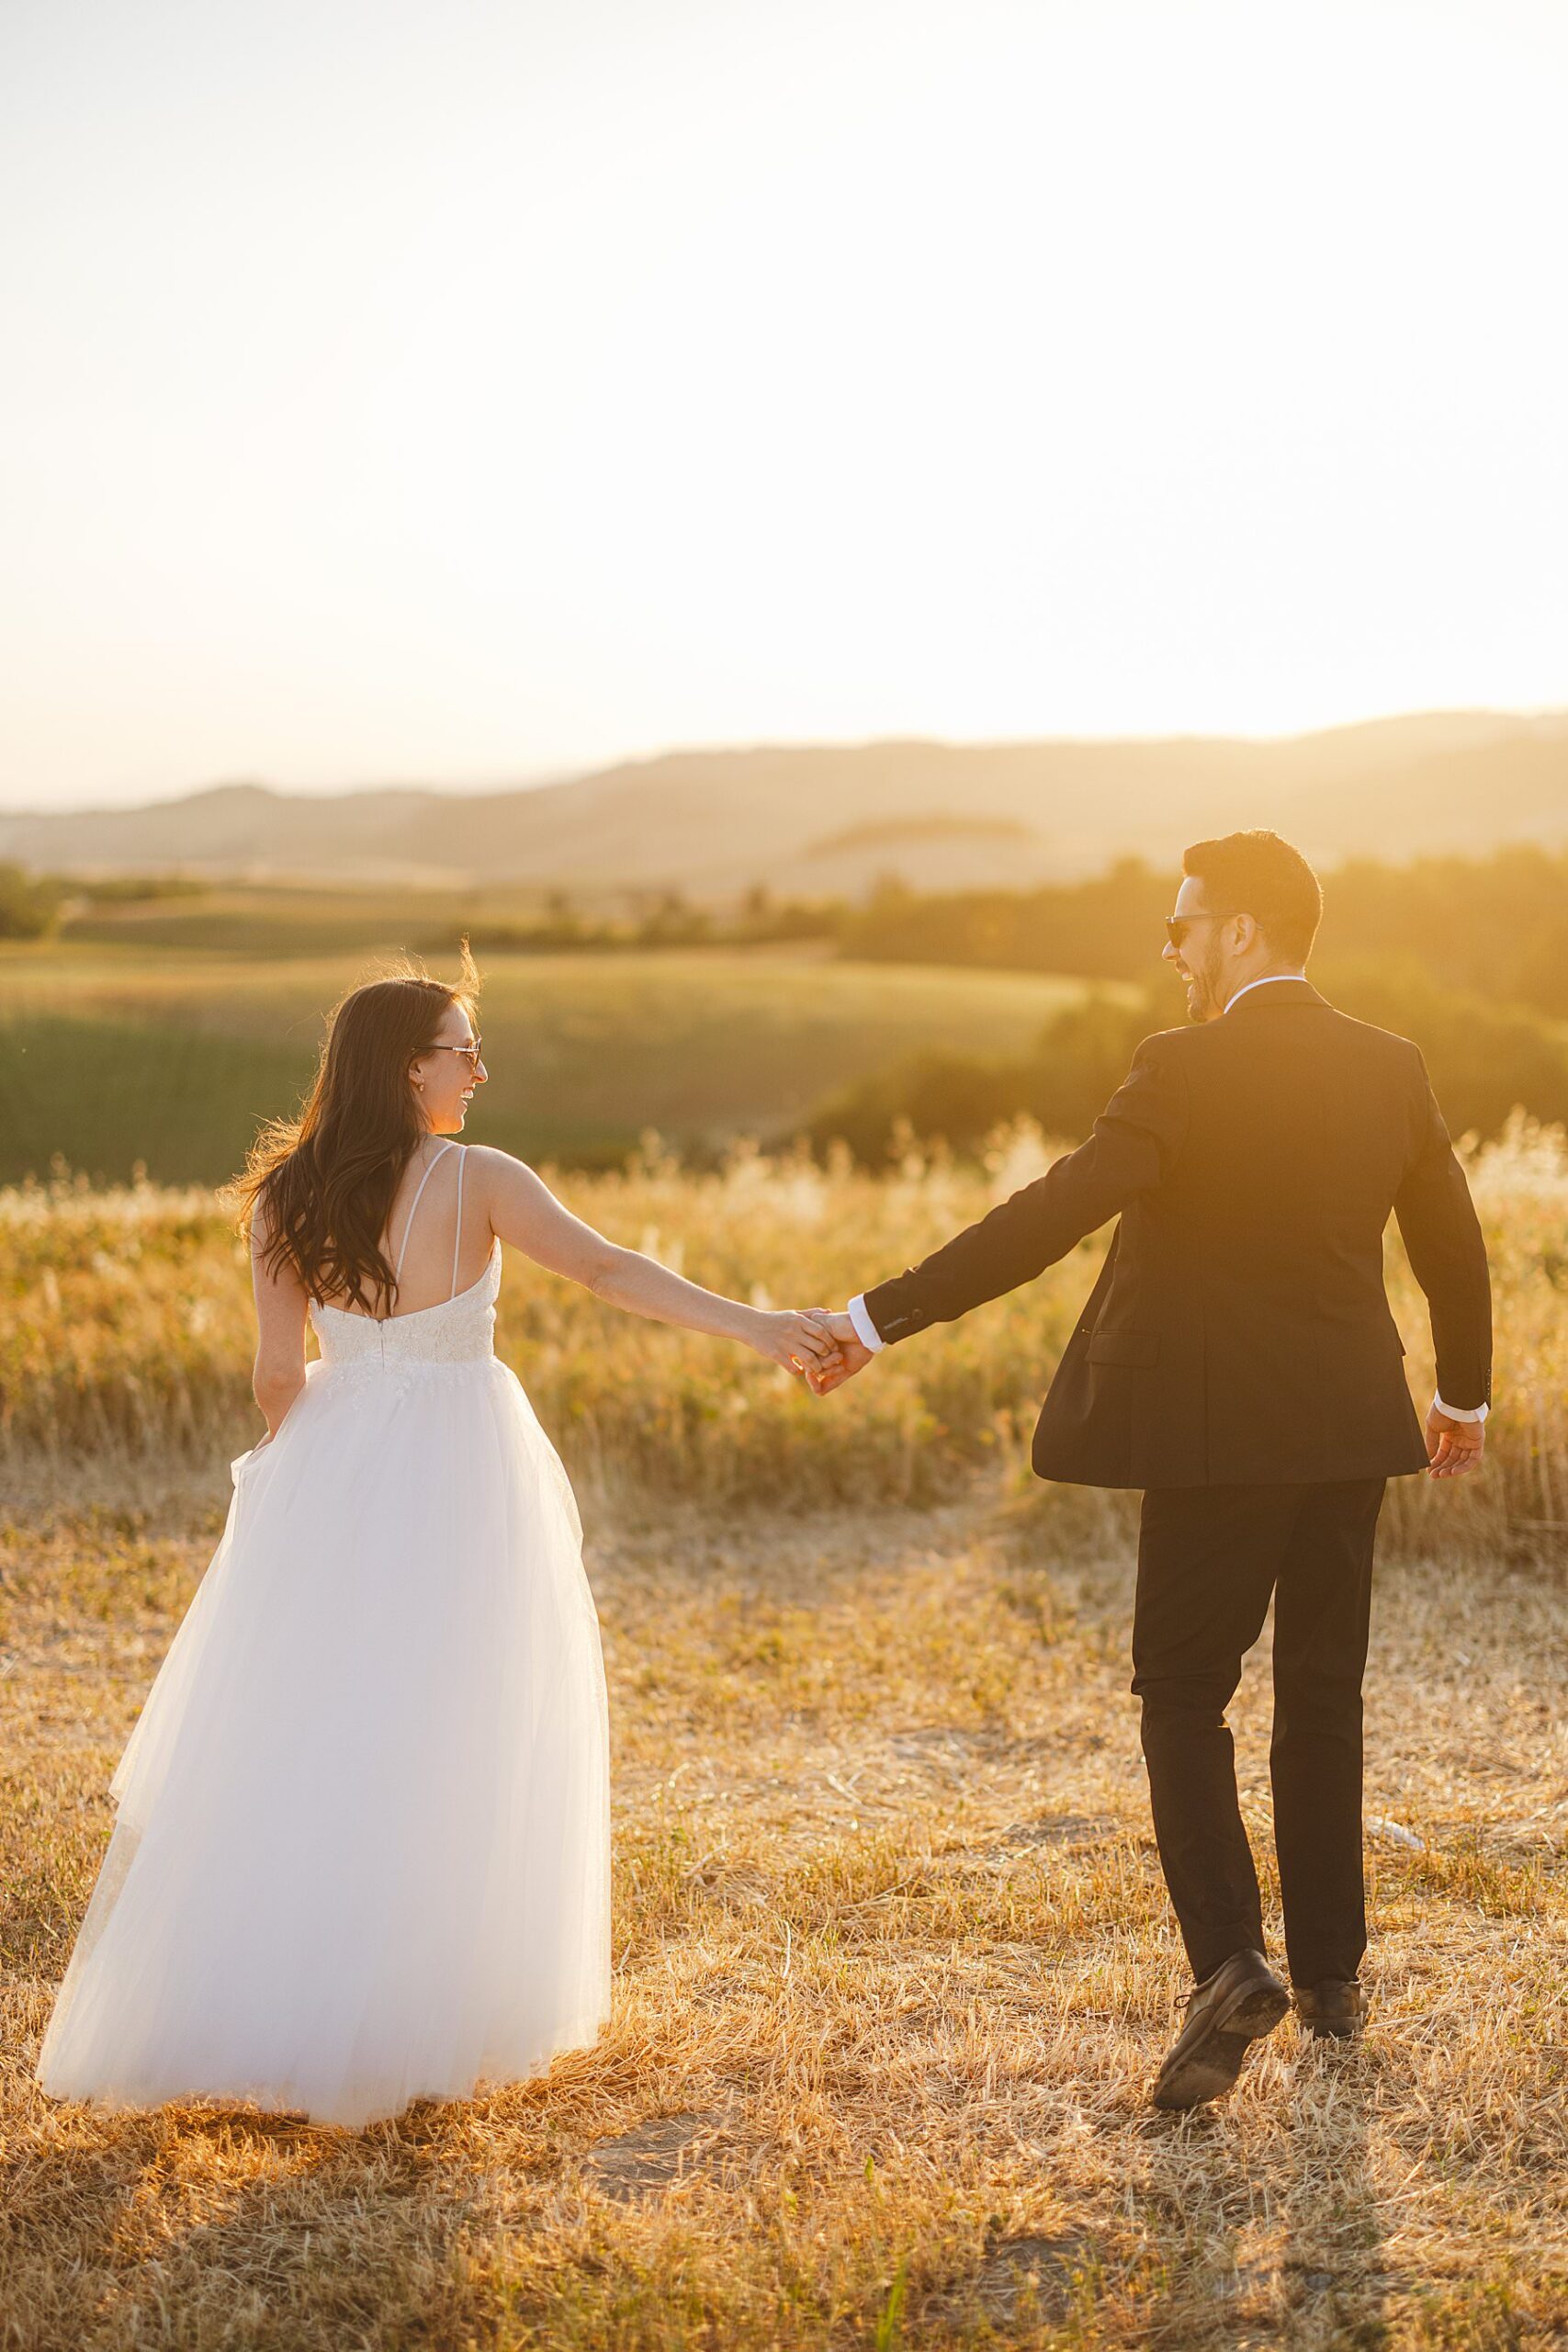 Bride and groom wedding portrait in the golden hour light heart of Val d’Orcia near Pienza